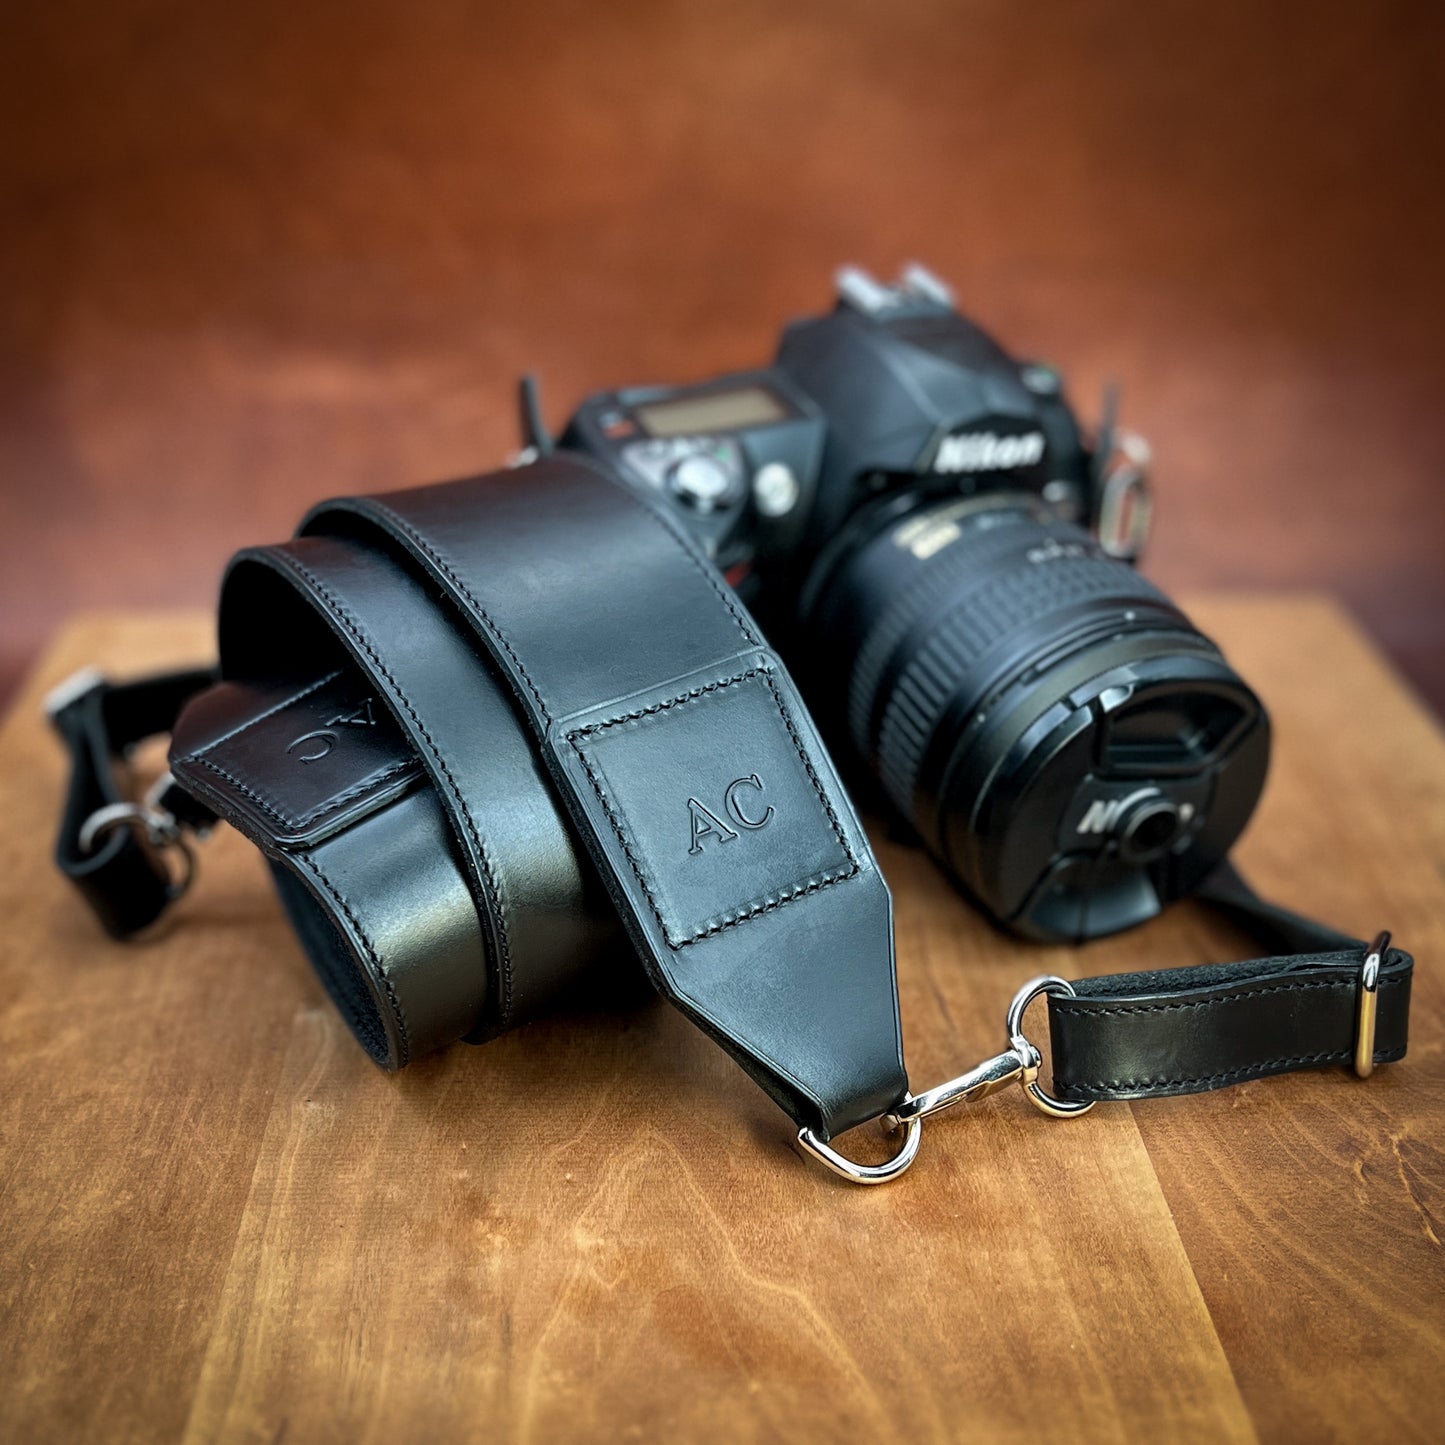 Horween Leather Camera Strap - Handmade to Order